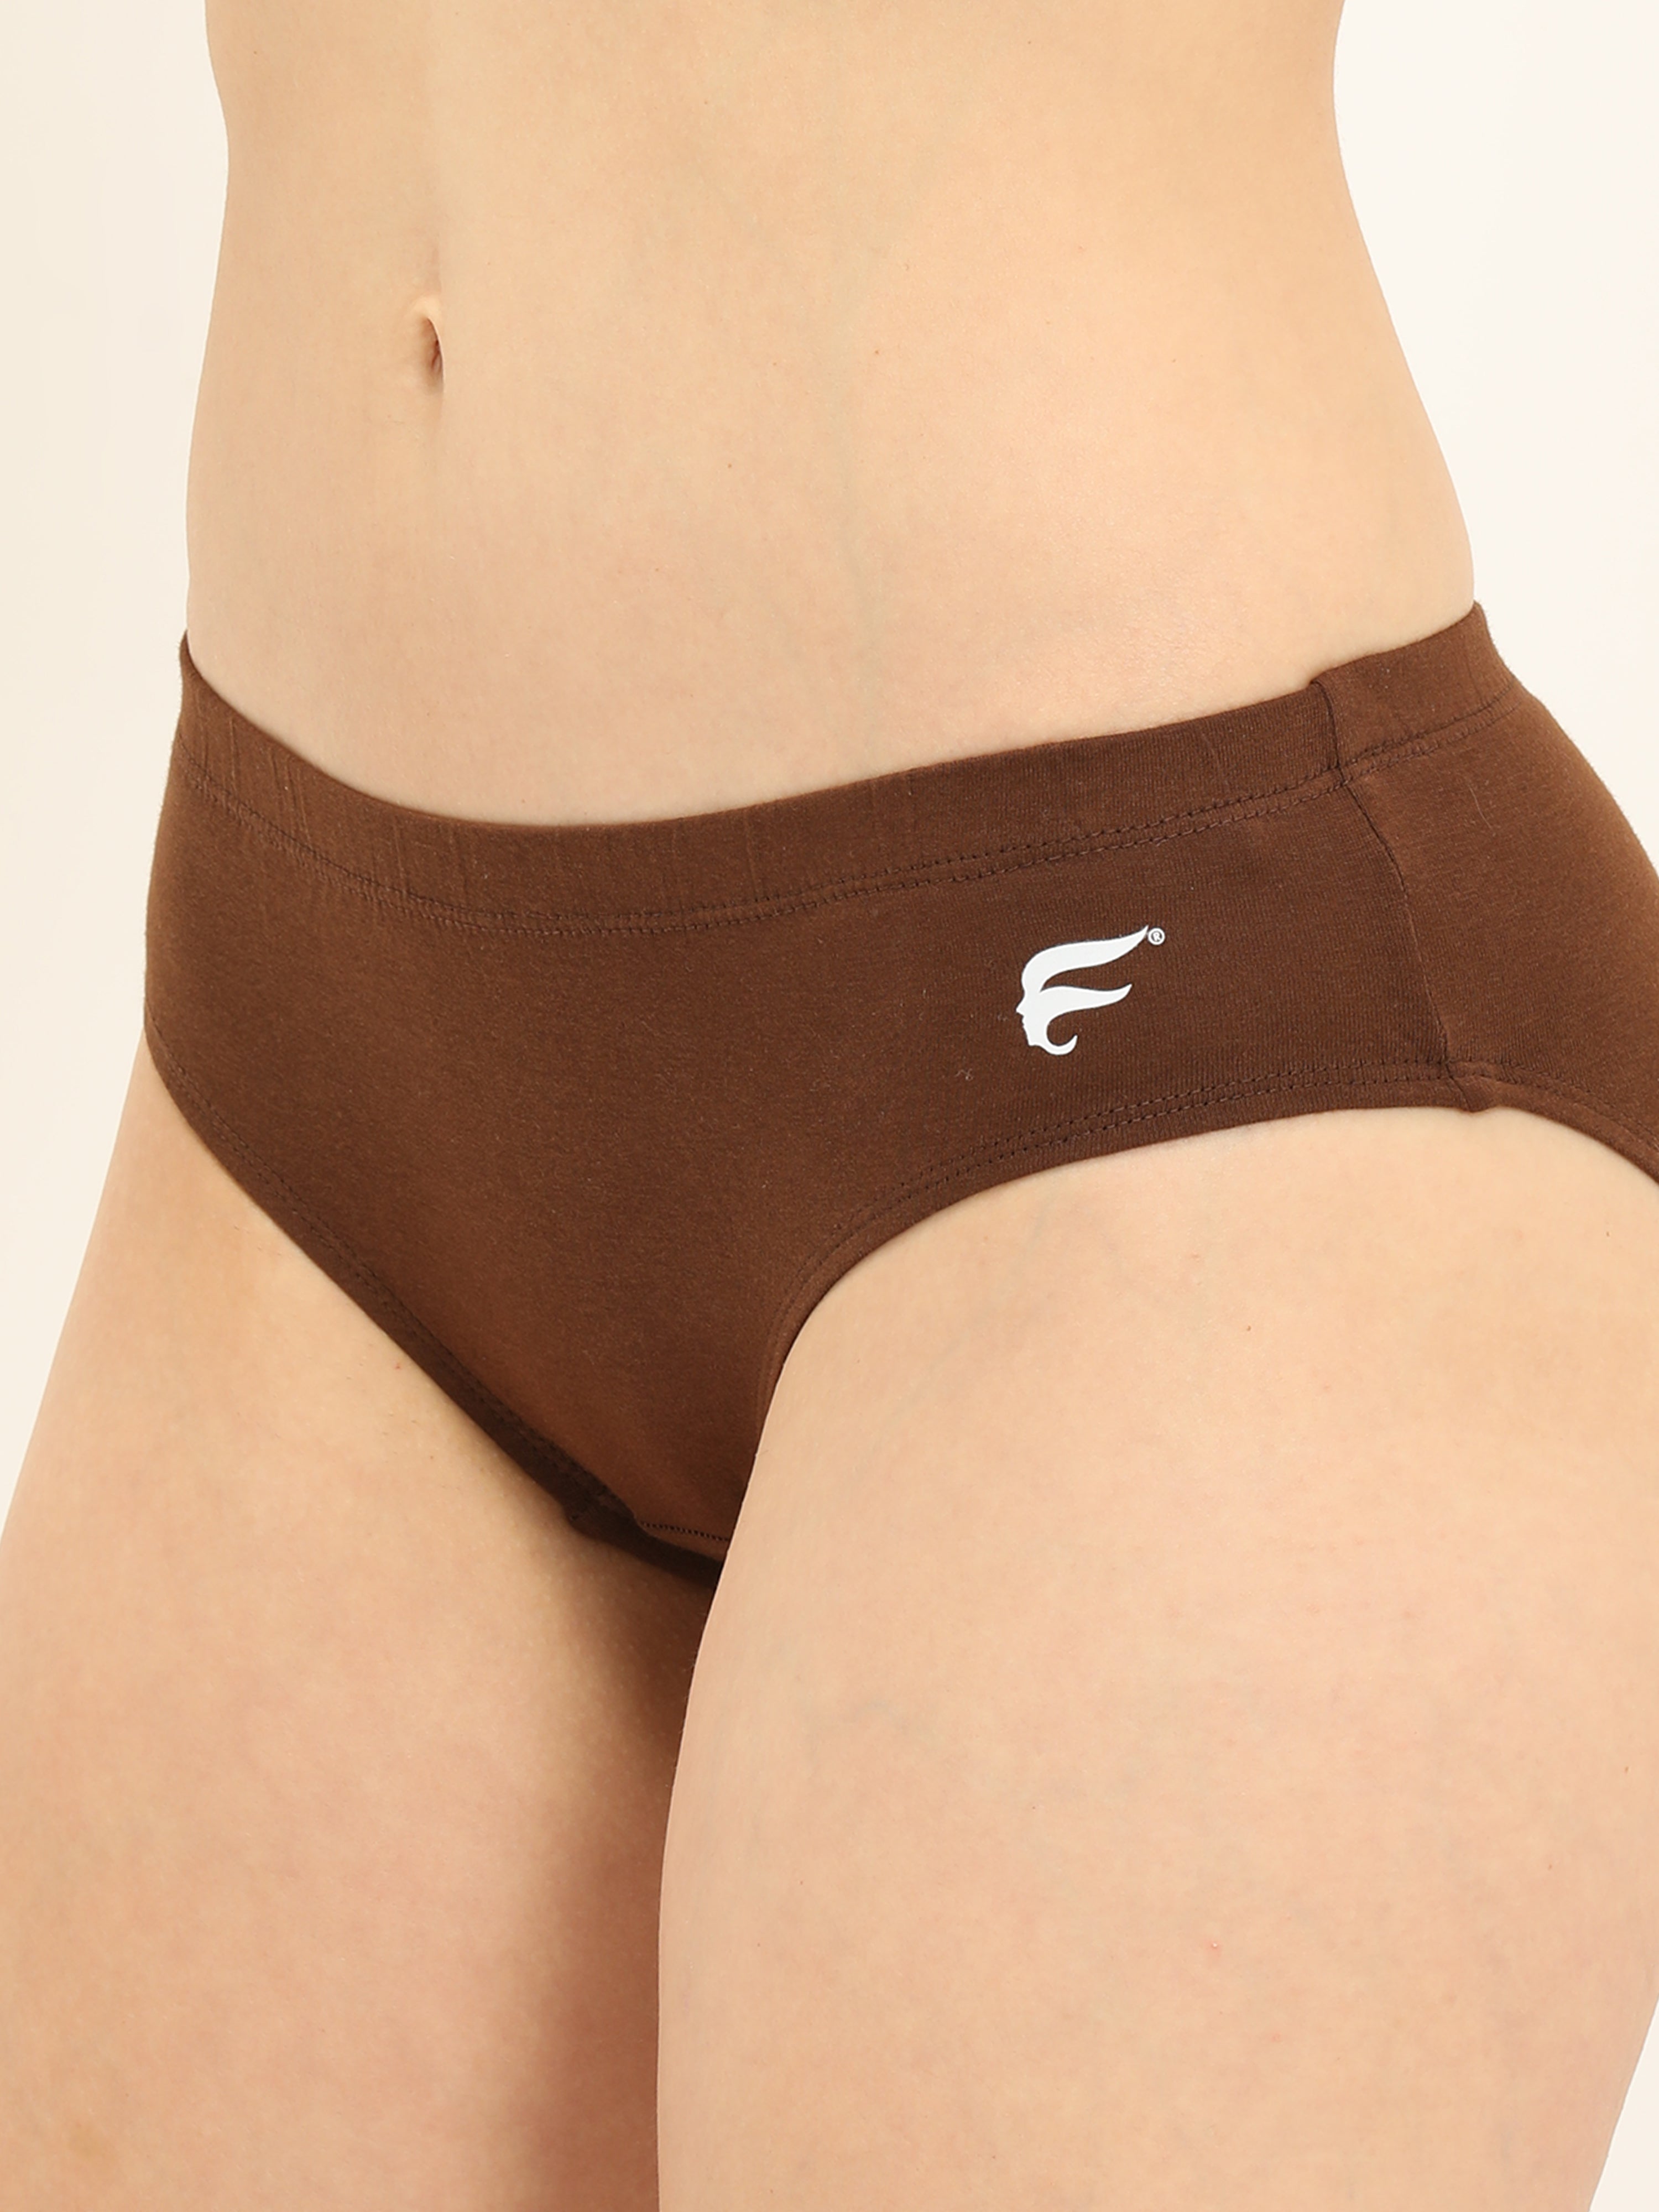 Envie Brief, Low rise panty (Pack of 3) Combo Blue curaco, Brown, Black